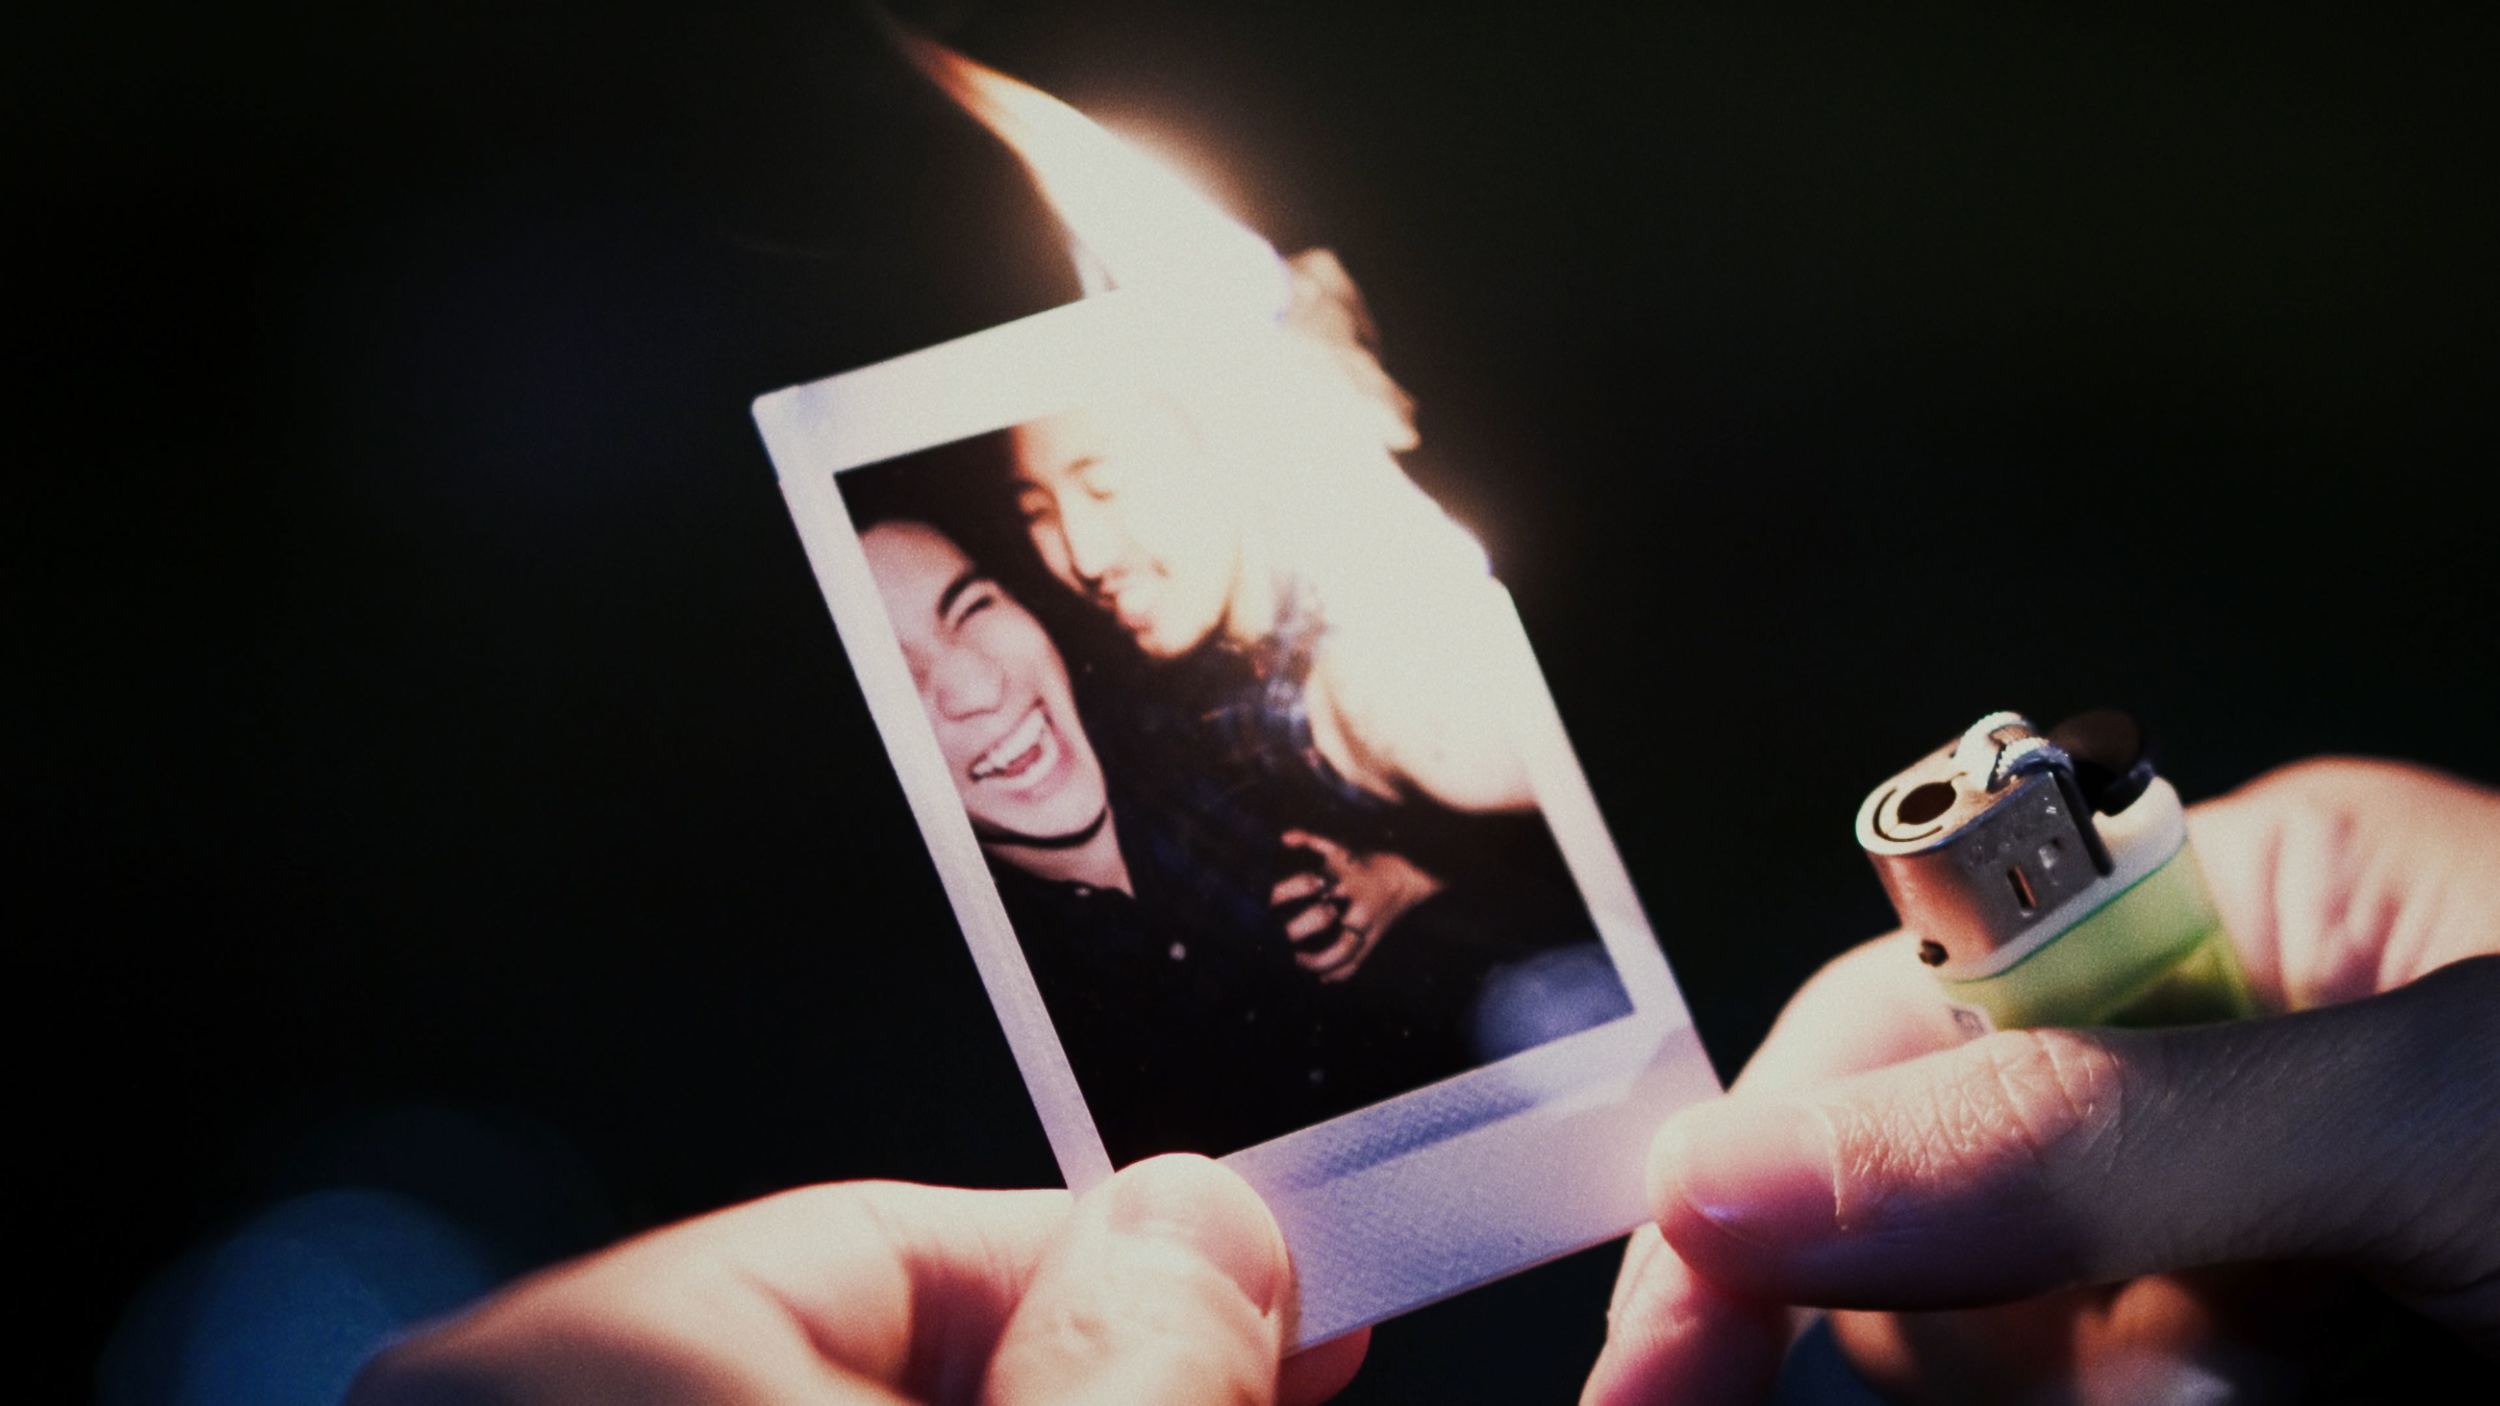 Burning The Picture.jpg